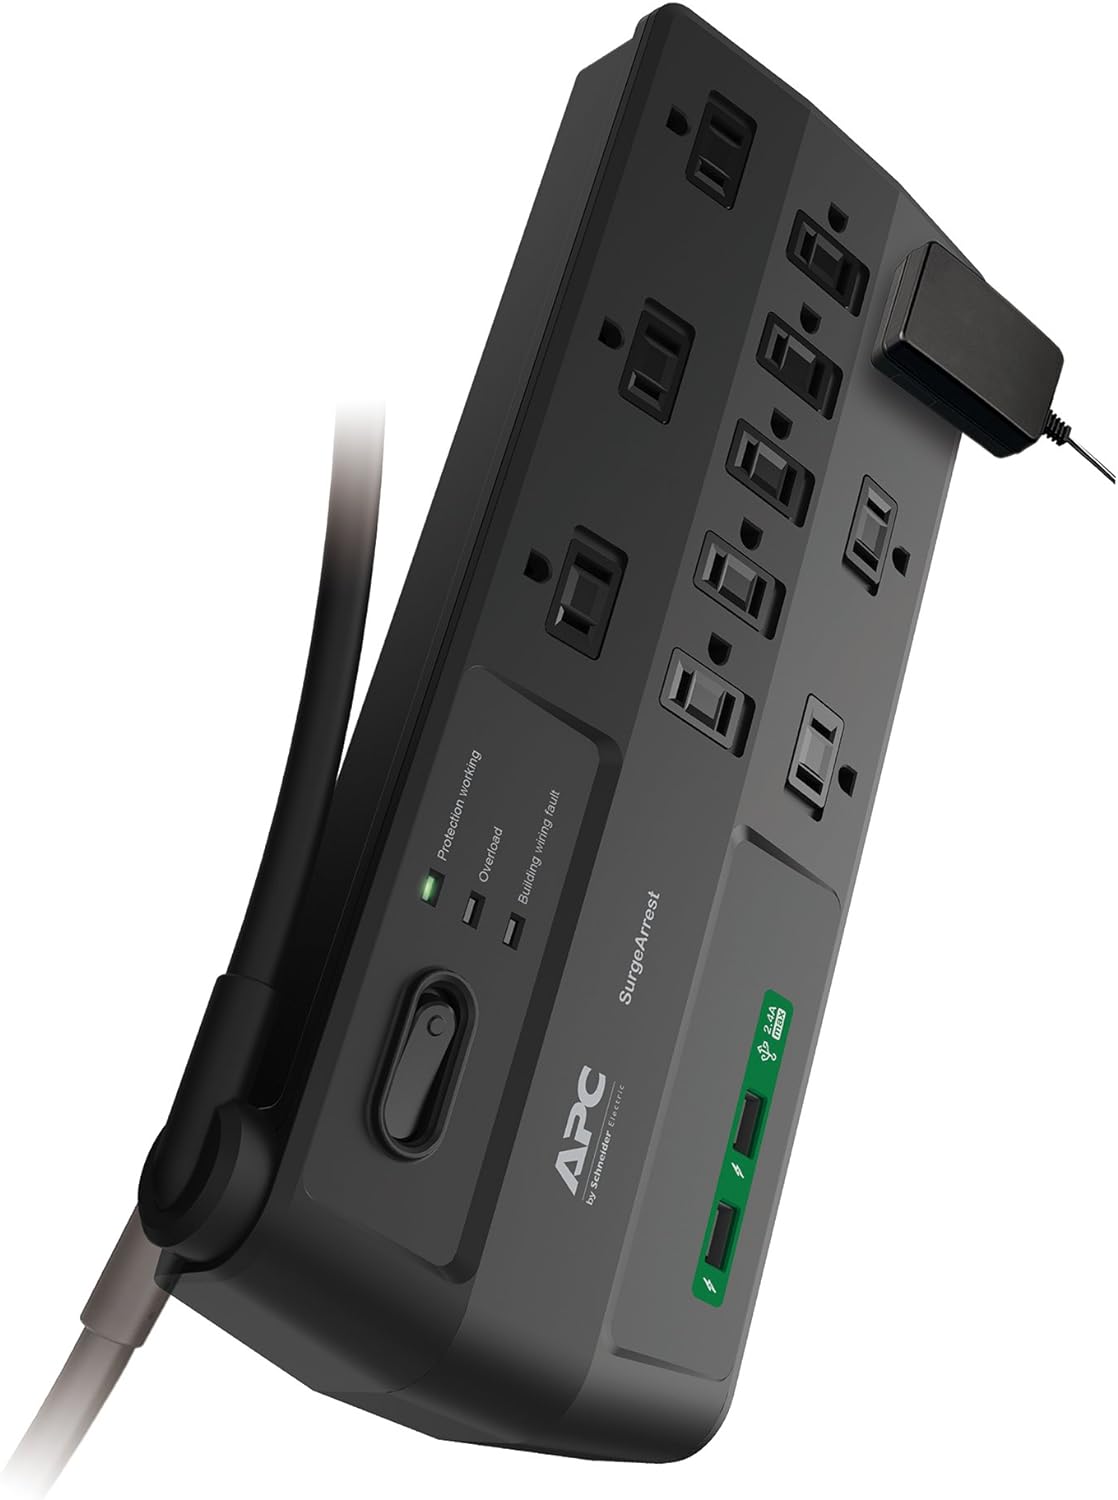 APC Performance Surge Protector with USB Ports: The Ultimate Power Strip Review